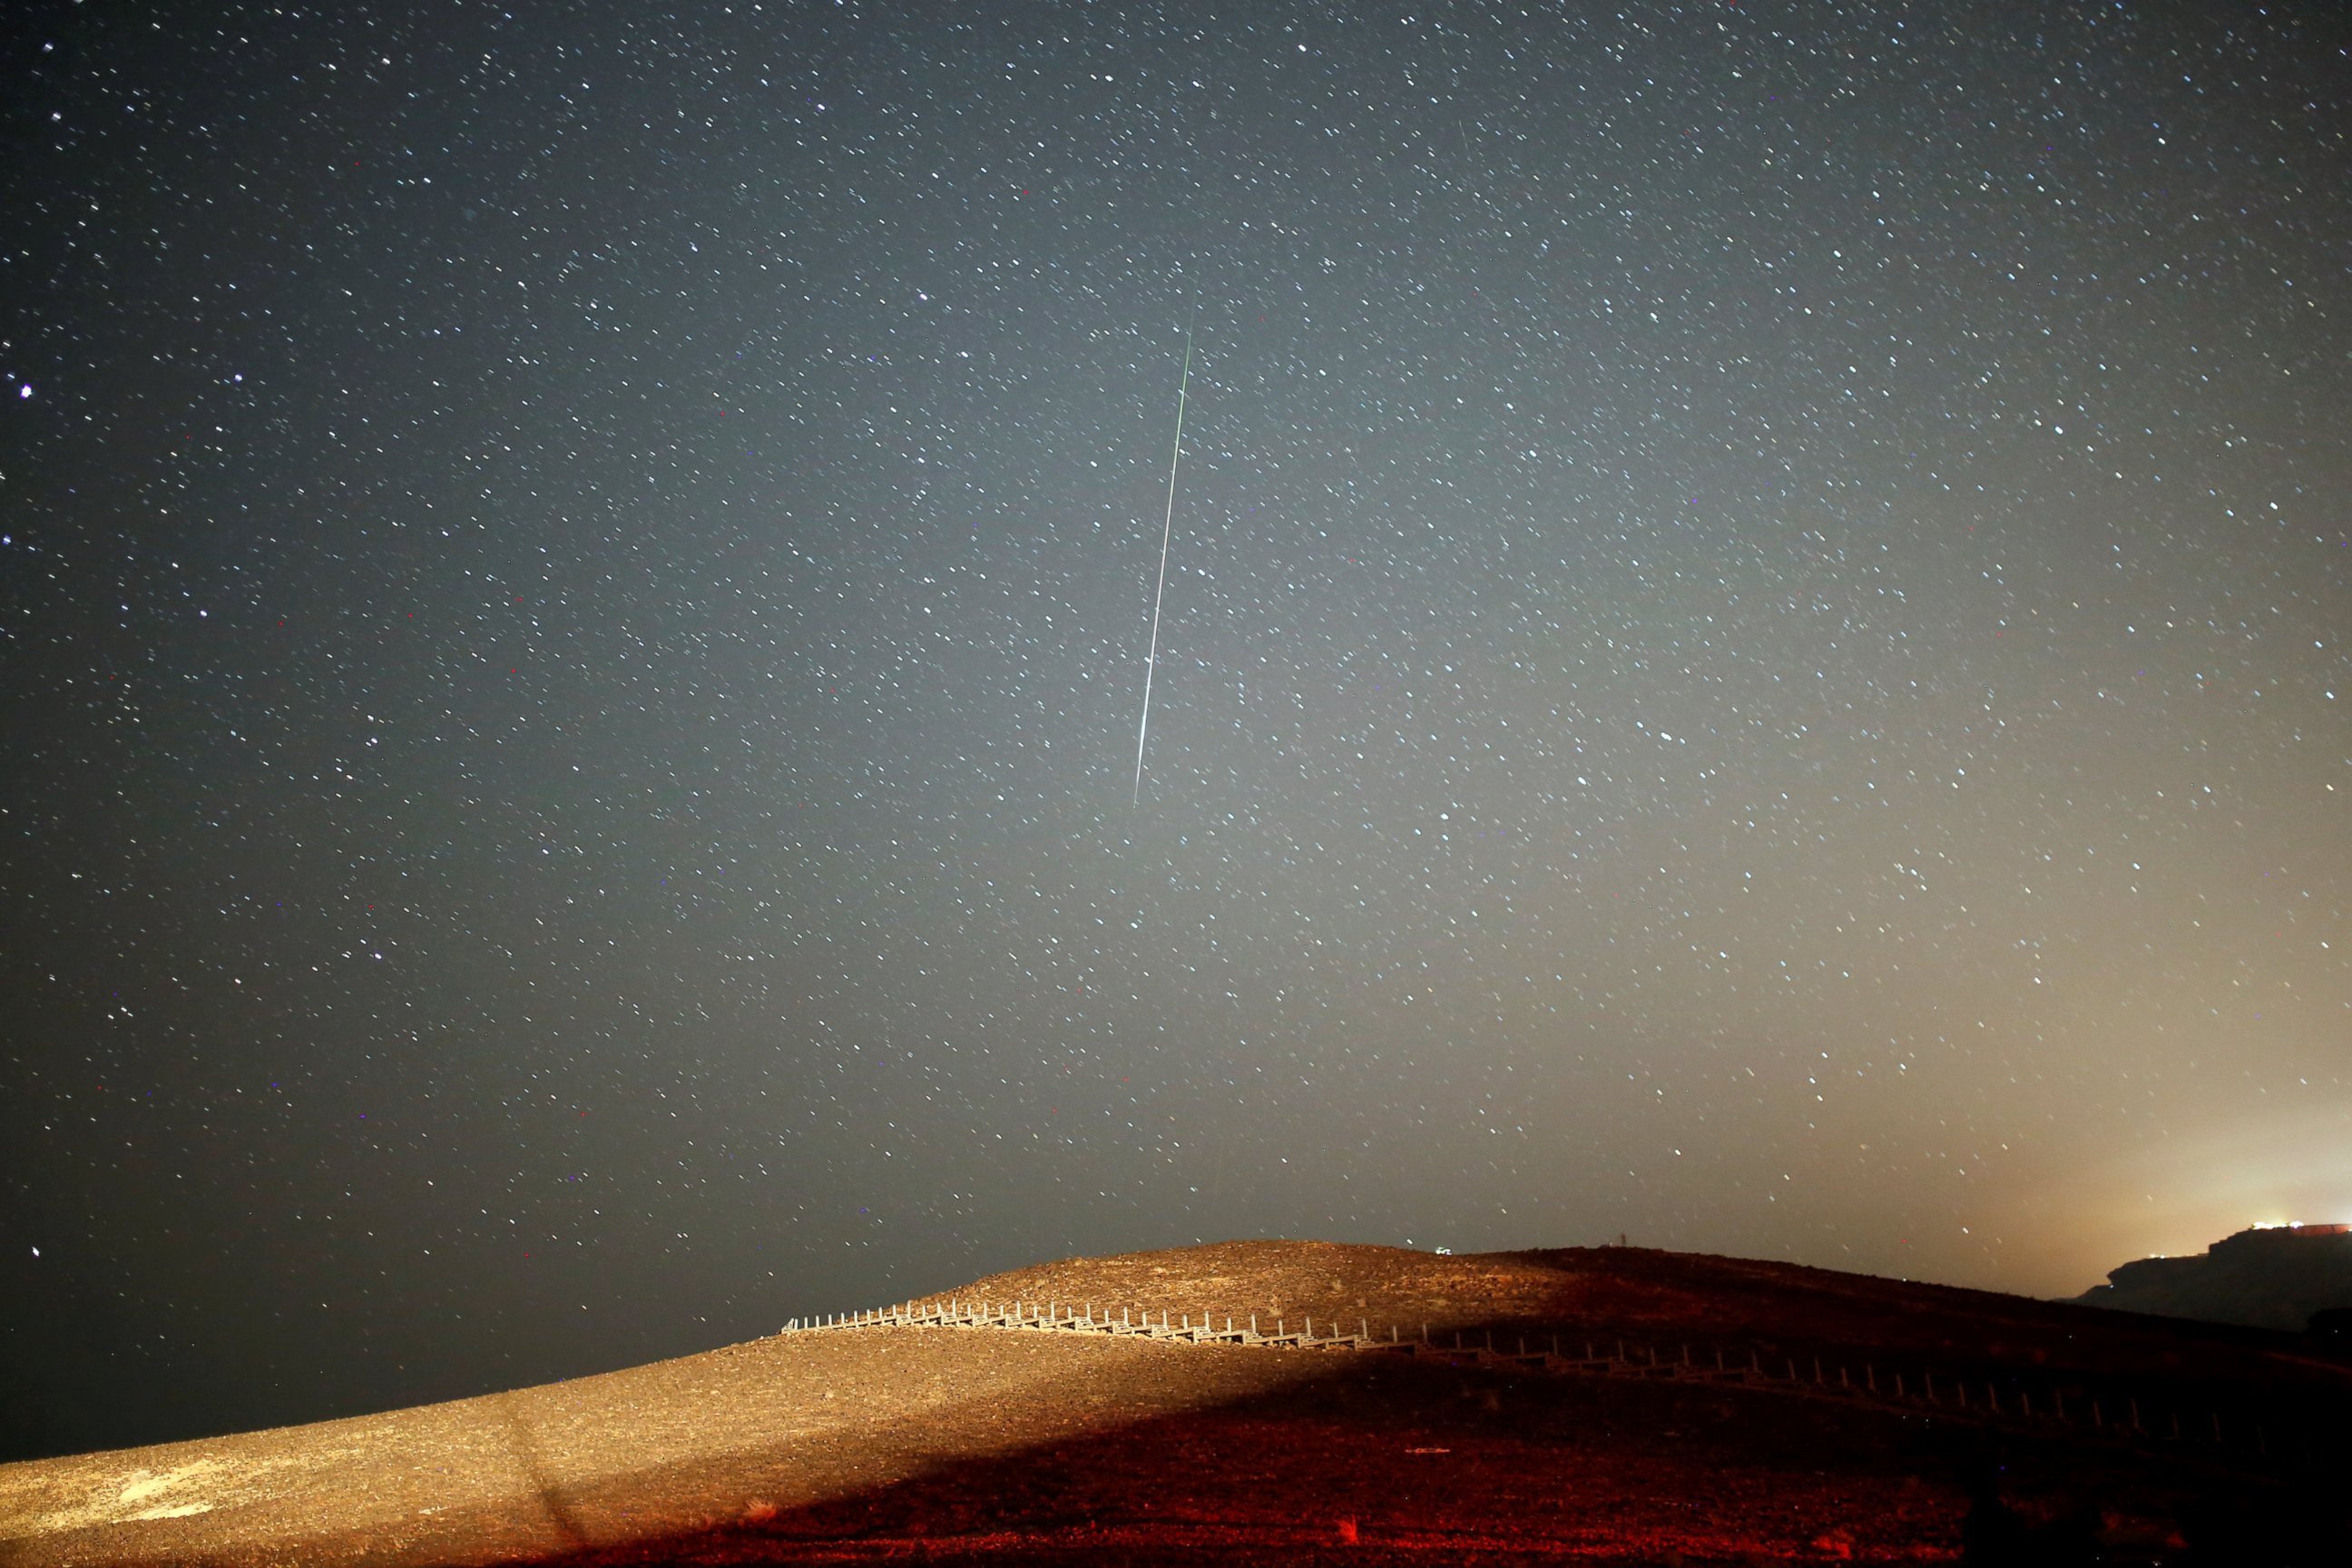 PHOTO: A meteor streaks across the sky in the early morning during the Perseid meteor shower in Ramon Crater near the town of Mitzpe Ramon, Israel, Aug.12, 2016.